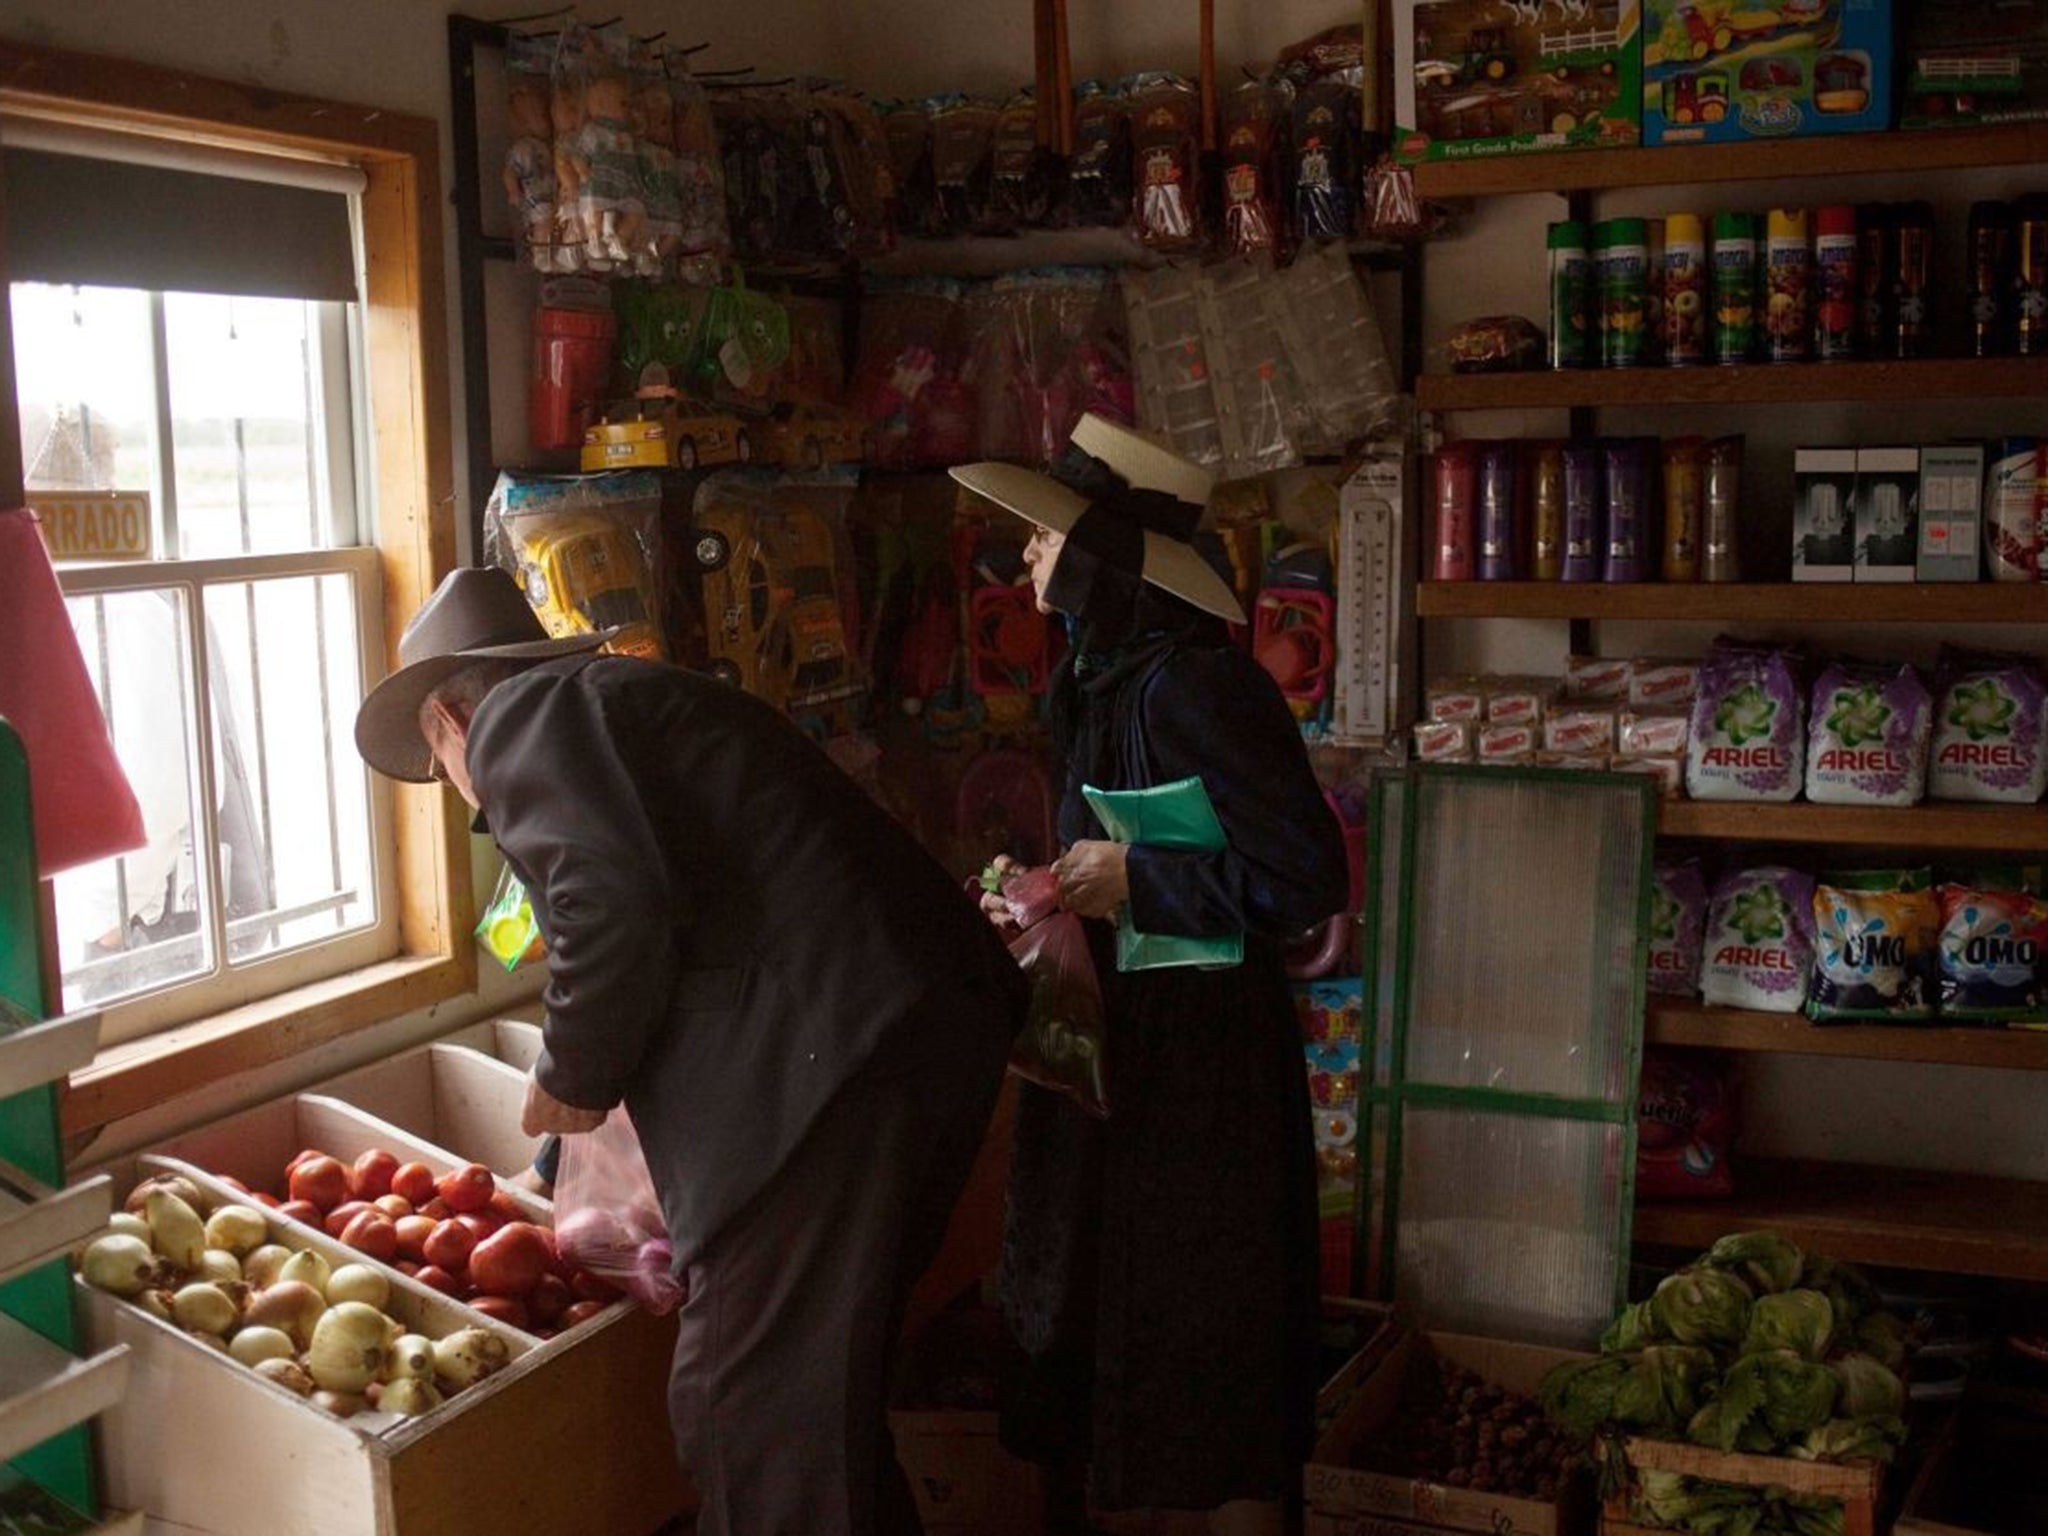 A Mennonite couple in Bolivia. Conservative members are known to shun technology